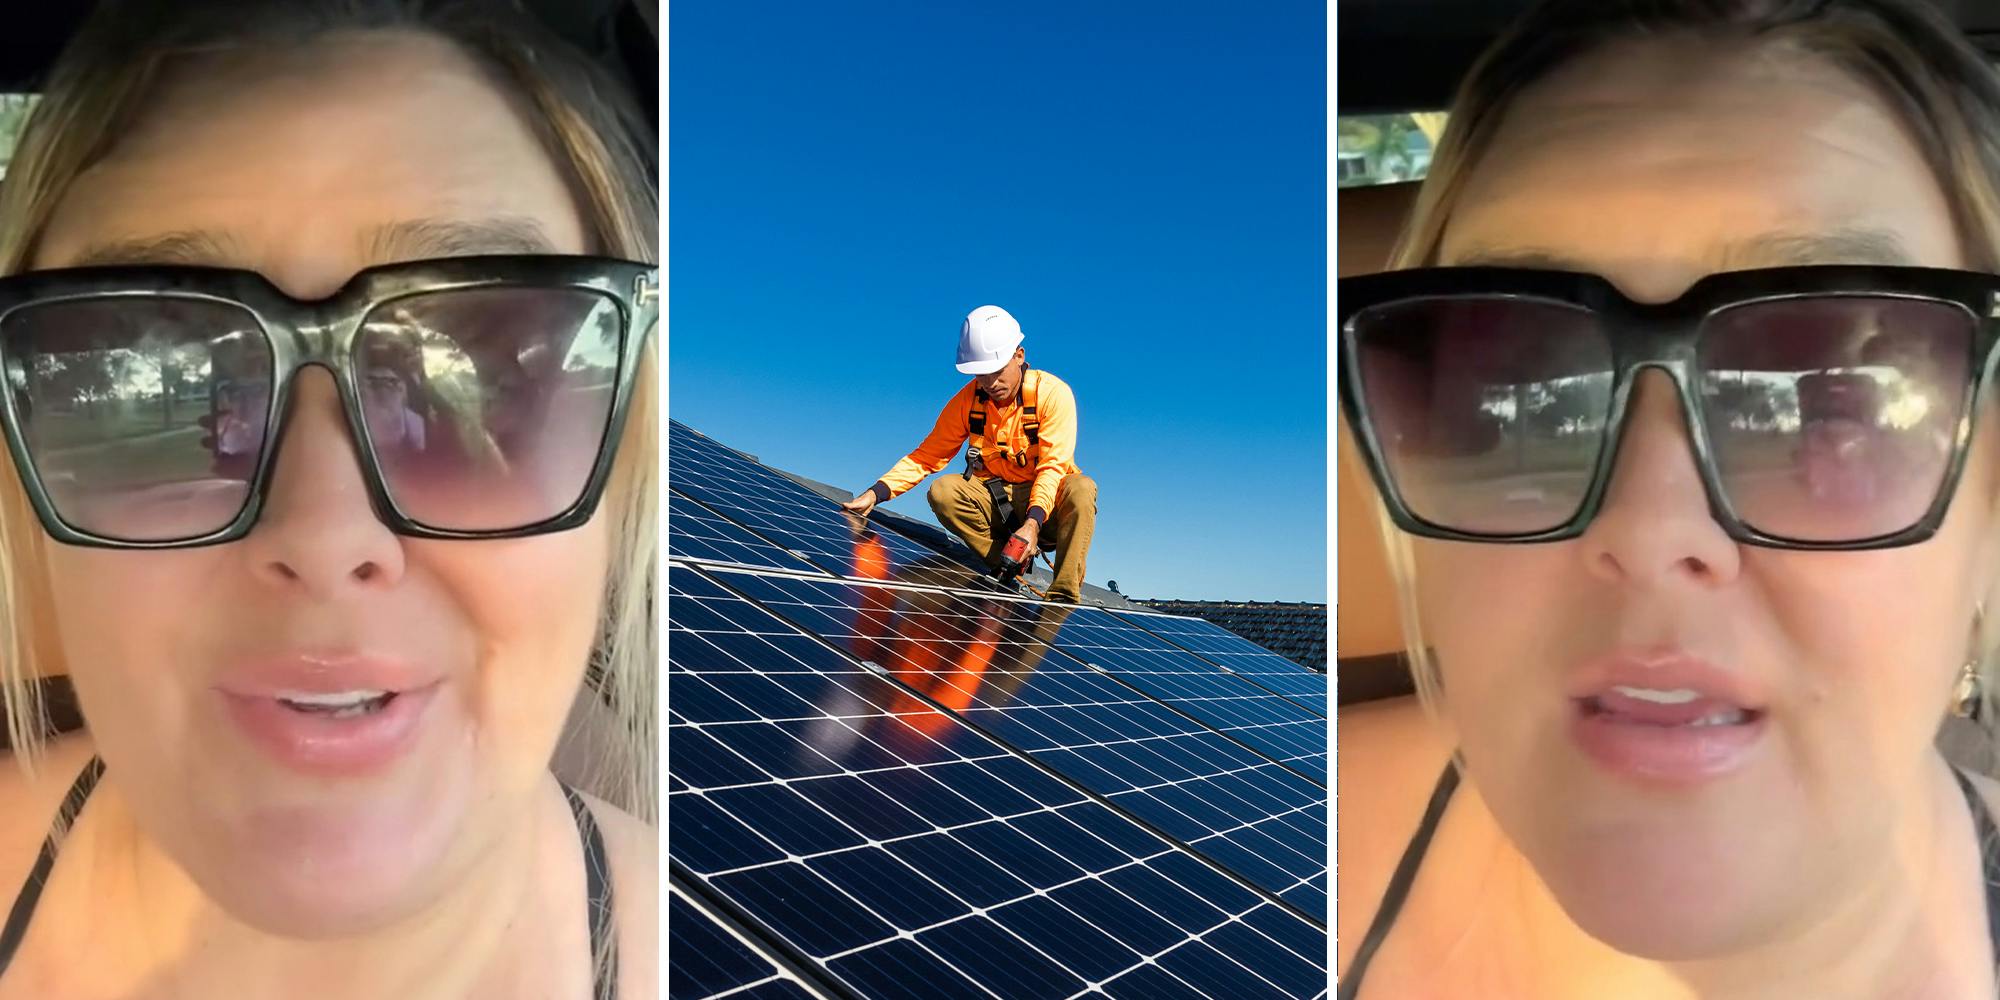 Woman warns you should never buy solar panels, they’re ‘like a Trojan horse’